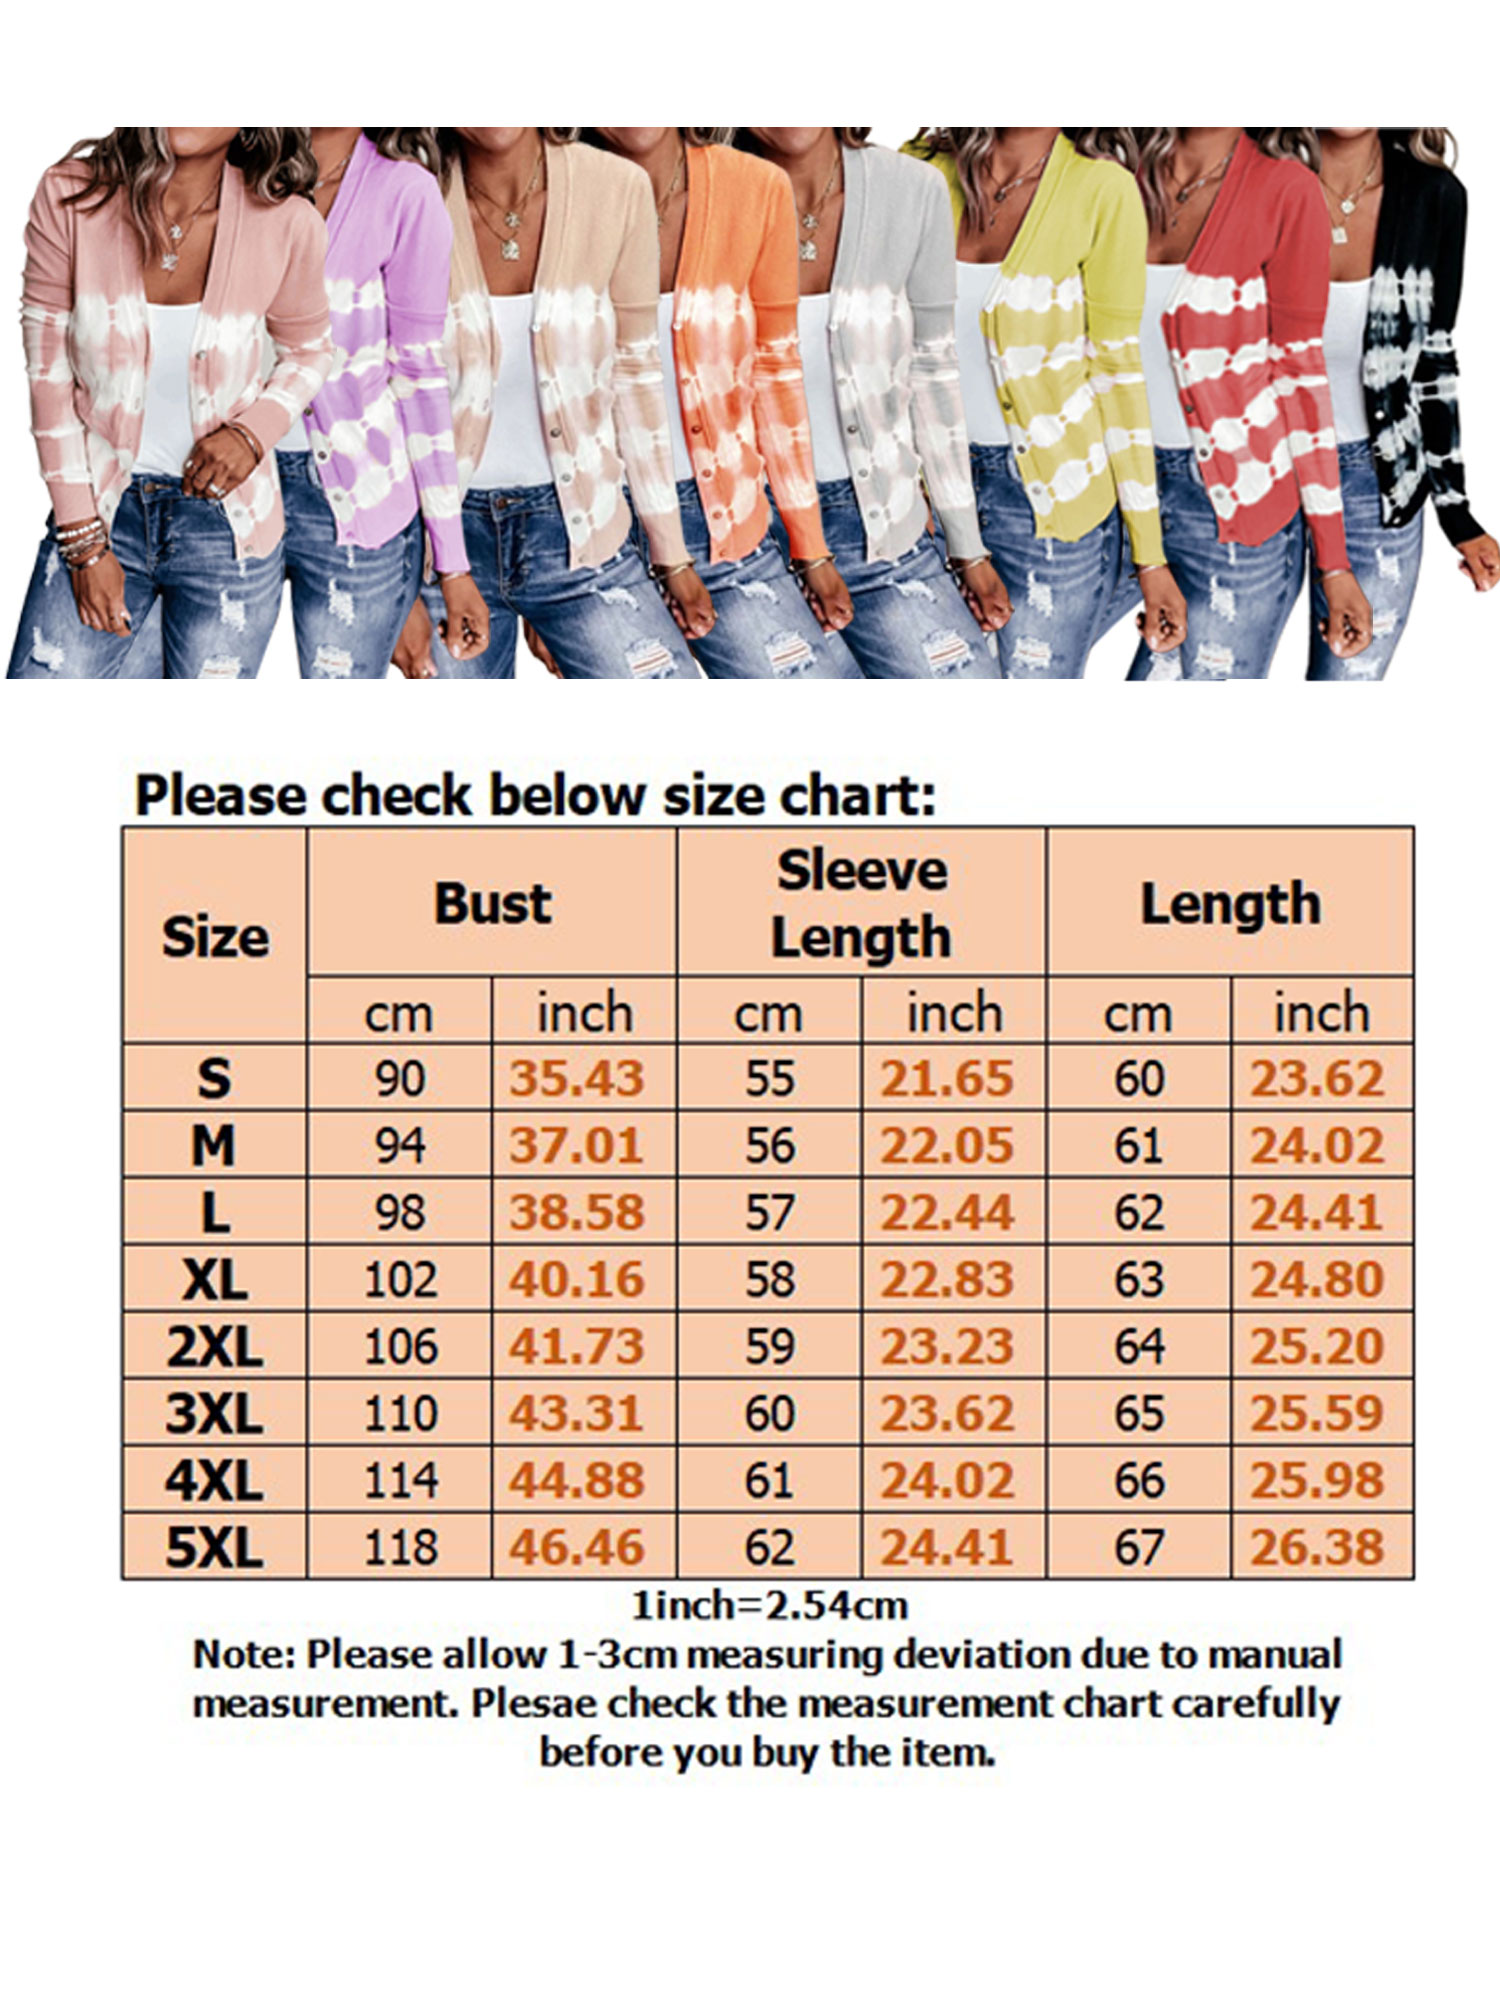 Christmas Gift For Familys LIDYCE Oversized Loose Long Sleeve Cardigan Sweater Coat For Women Plus Size Blouse Tops Ladies Button Down Coat Tops Jacket Outwear Tops - image 2 of 4